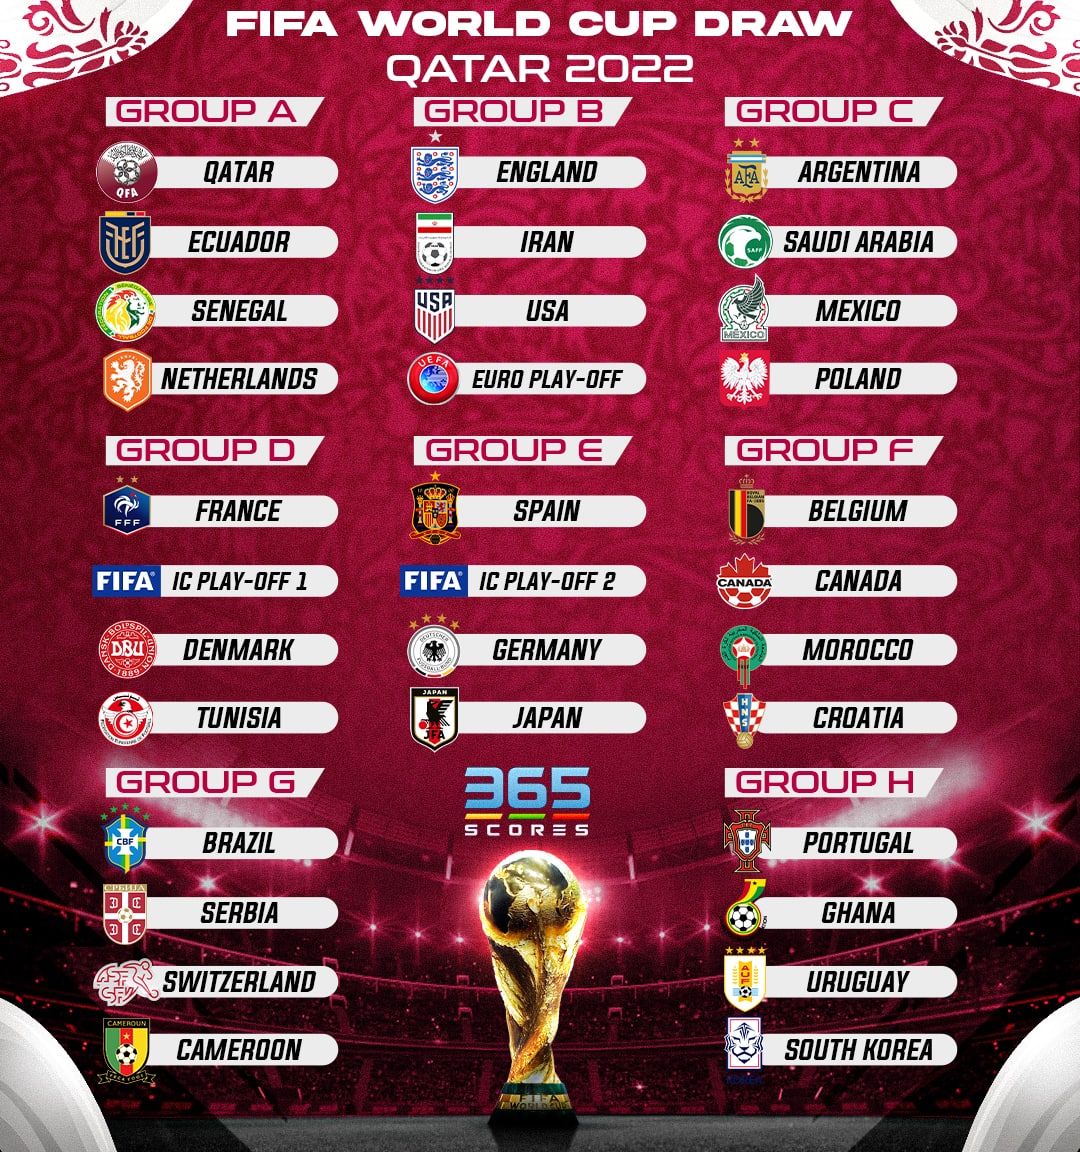 2014 World Cup Draw Pots Revealed, Updates on Prize Money | World cup  trophy, World cup draw, World cup qualifiers